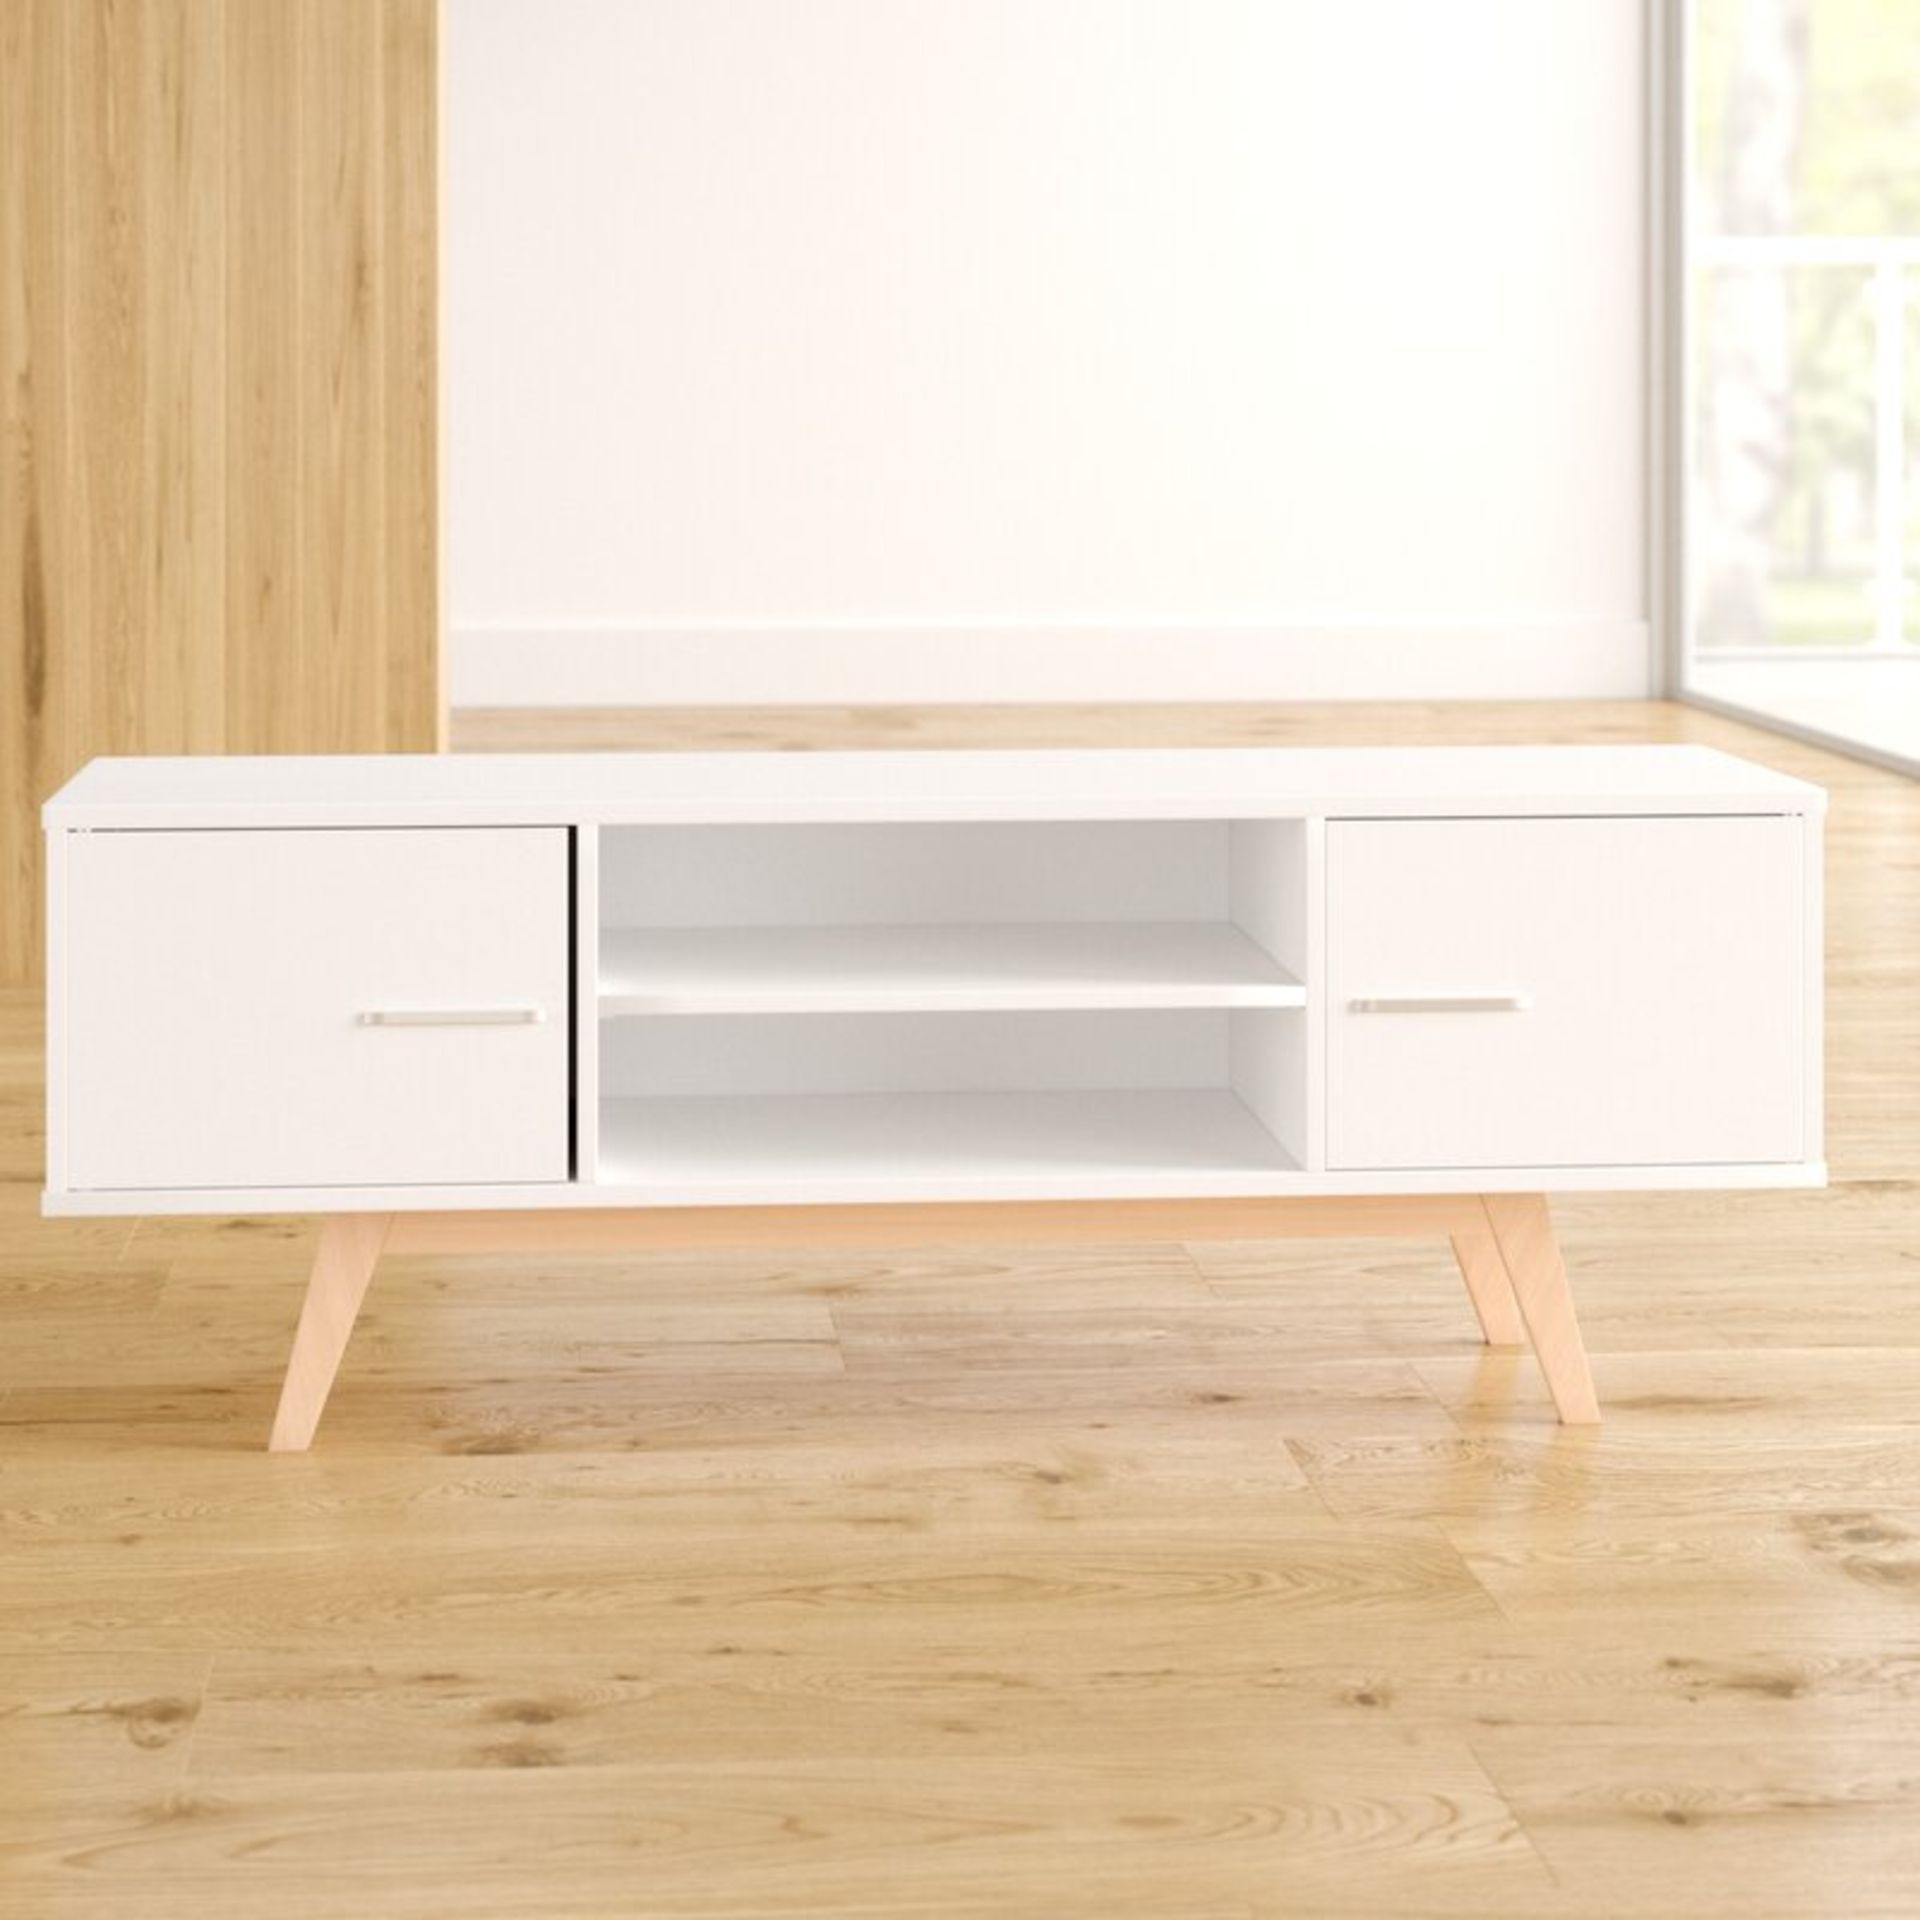 Carneal TV Stand for TVs up to 55 - RRP £169.99 - Image 3 of 3